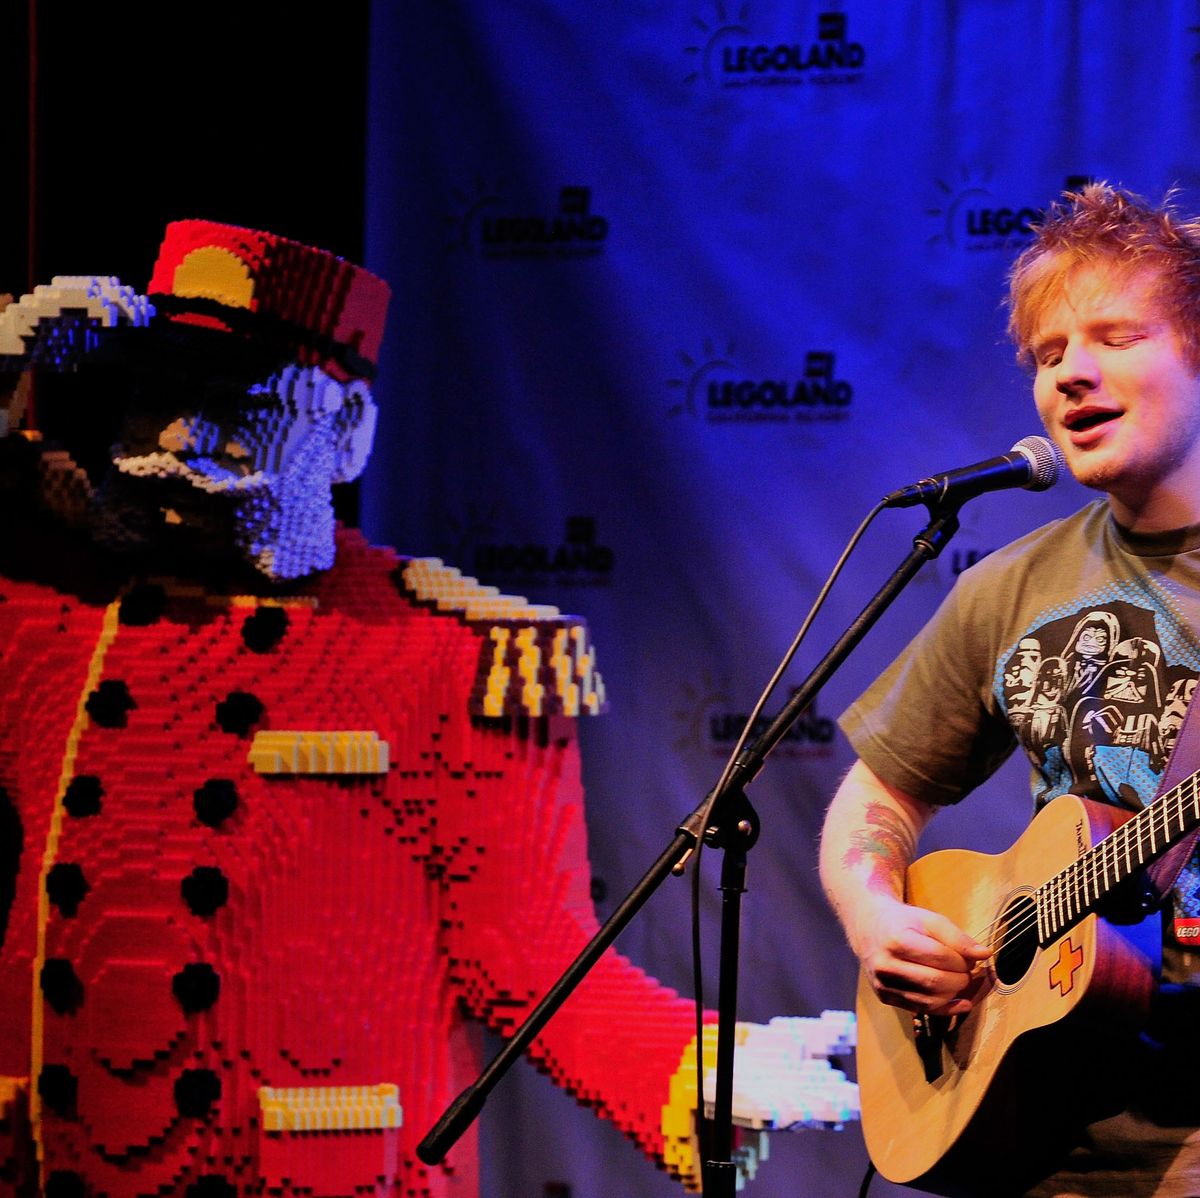 Ed Sheeran Makes Surprise Appearance at Lego Store in Minnesota